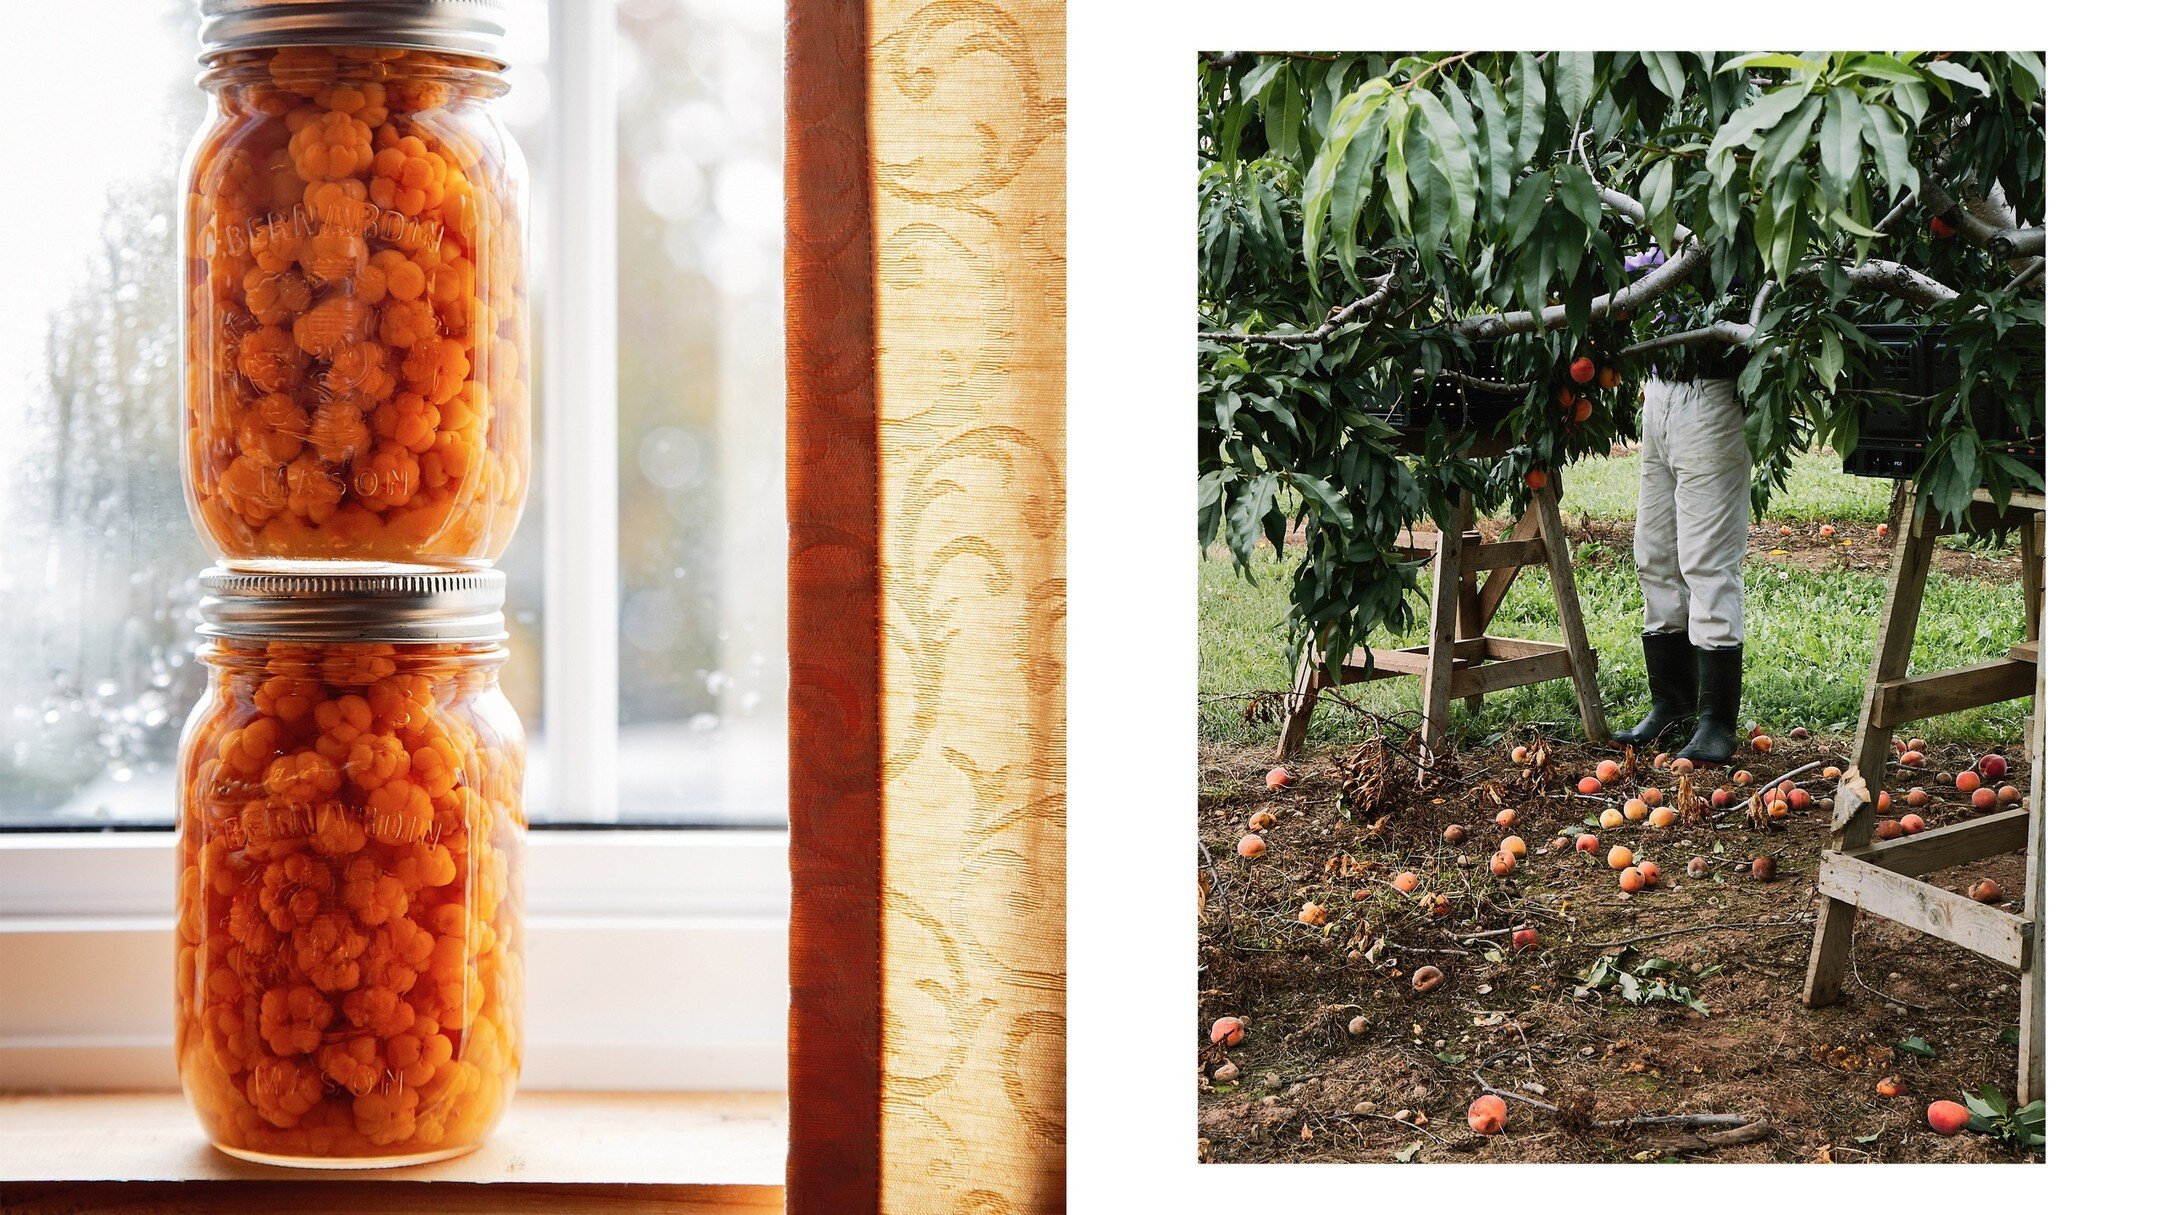 Inspired by the wave of warmth and the promise of growing things. Peaches in Nova Scotia and @foodcultureplace's preserved bakeapples in Newfoundland. More pages from the portfolio. In our workshops we do a portfolio dive and teach you how to put you